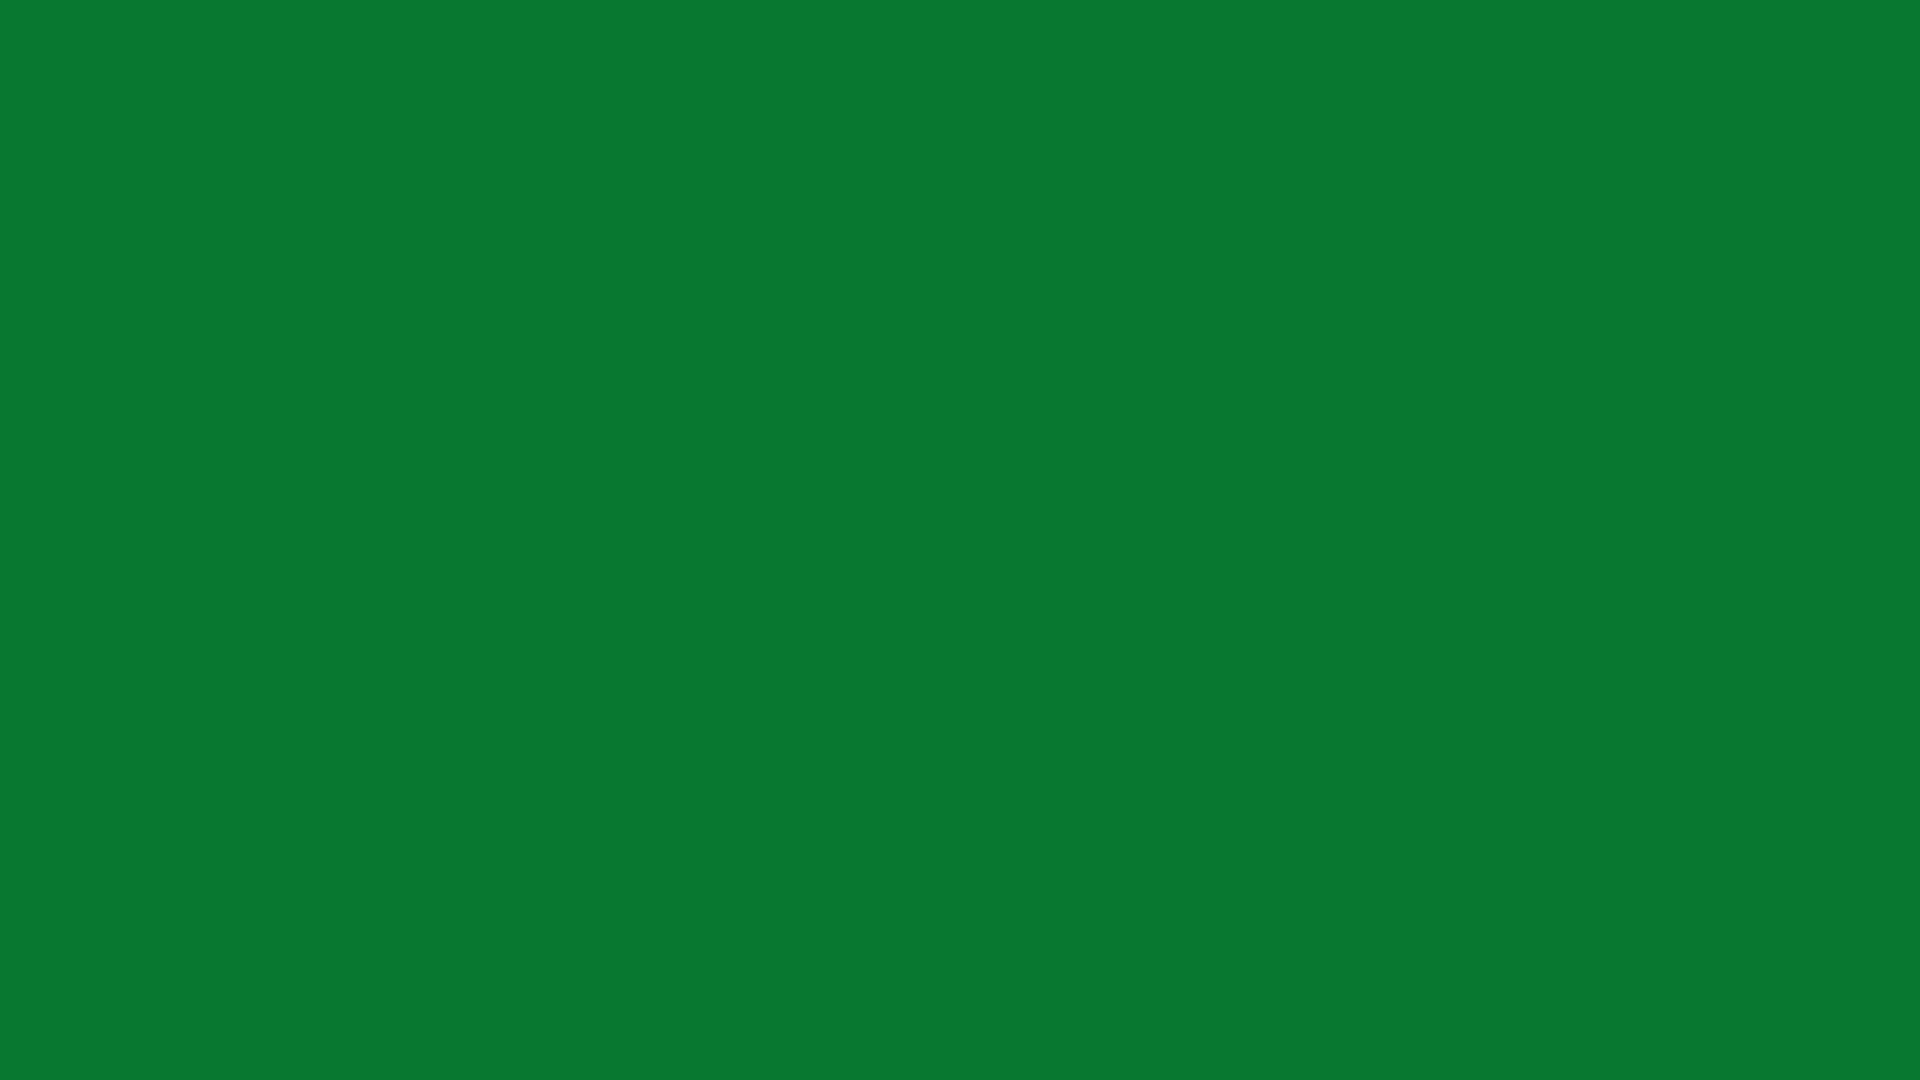 1920x1080 La Salle Green Solid Color Background